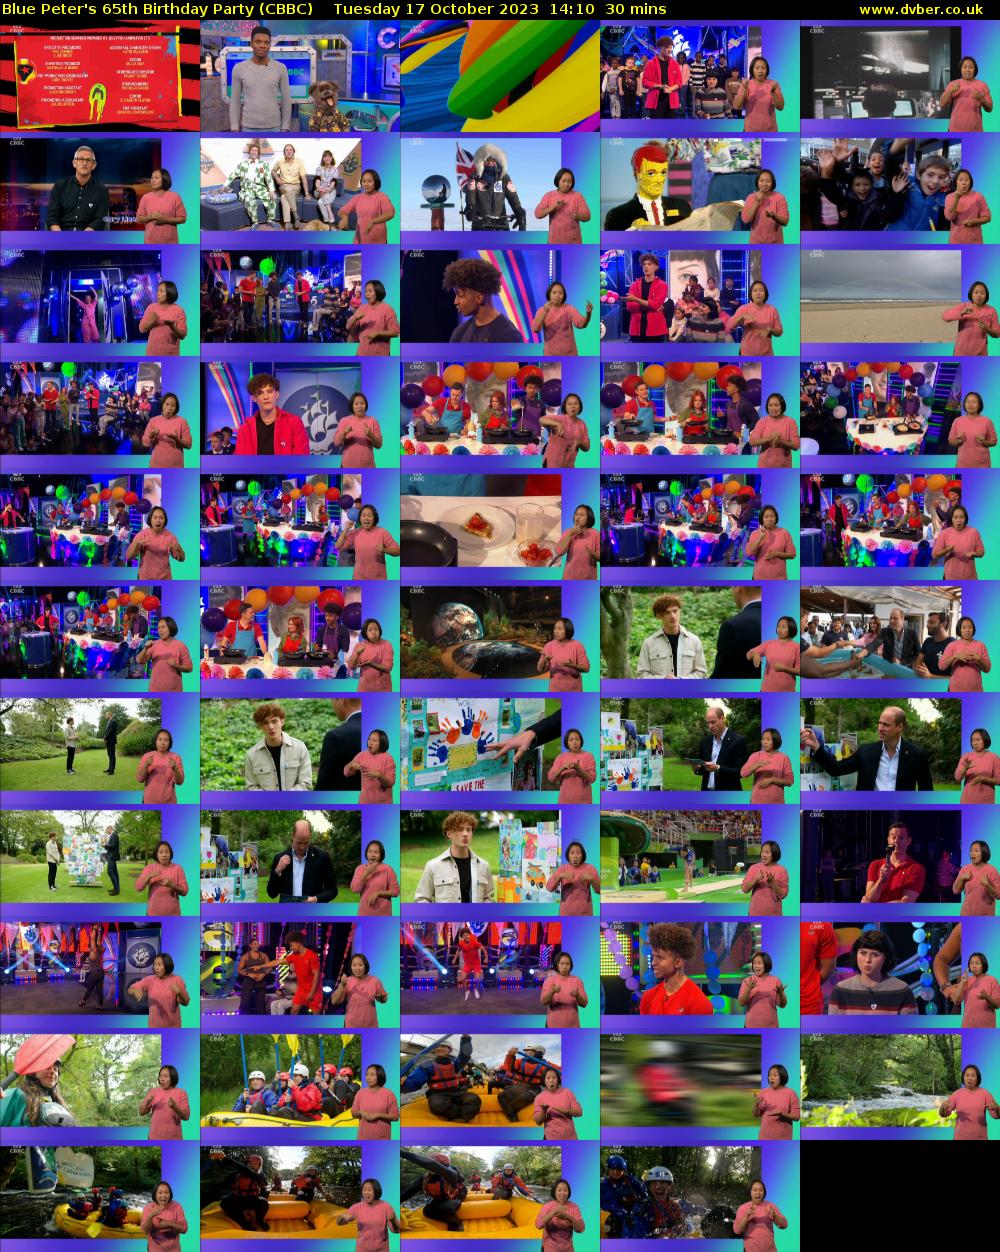 Blue Peter's 65th Birthday Party (CBBC) Tuesday 17 October 2023 14:10 - 14:40